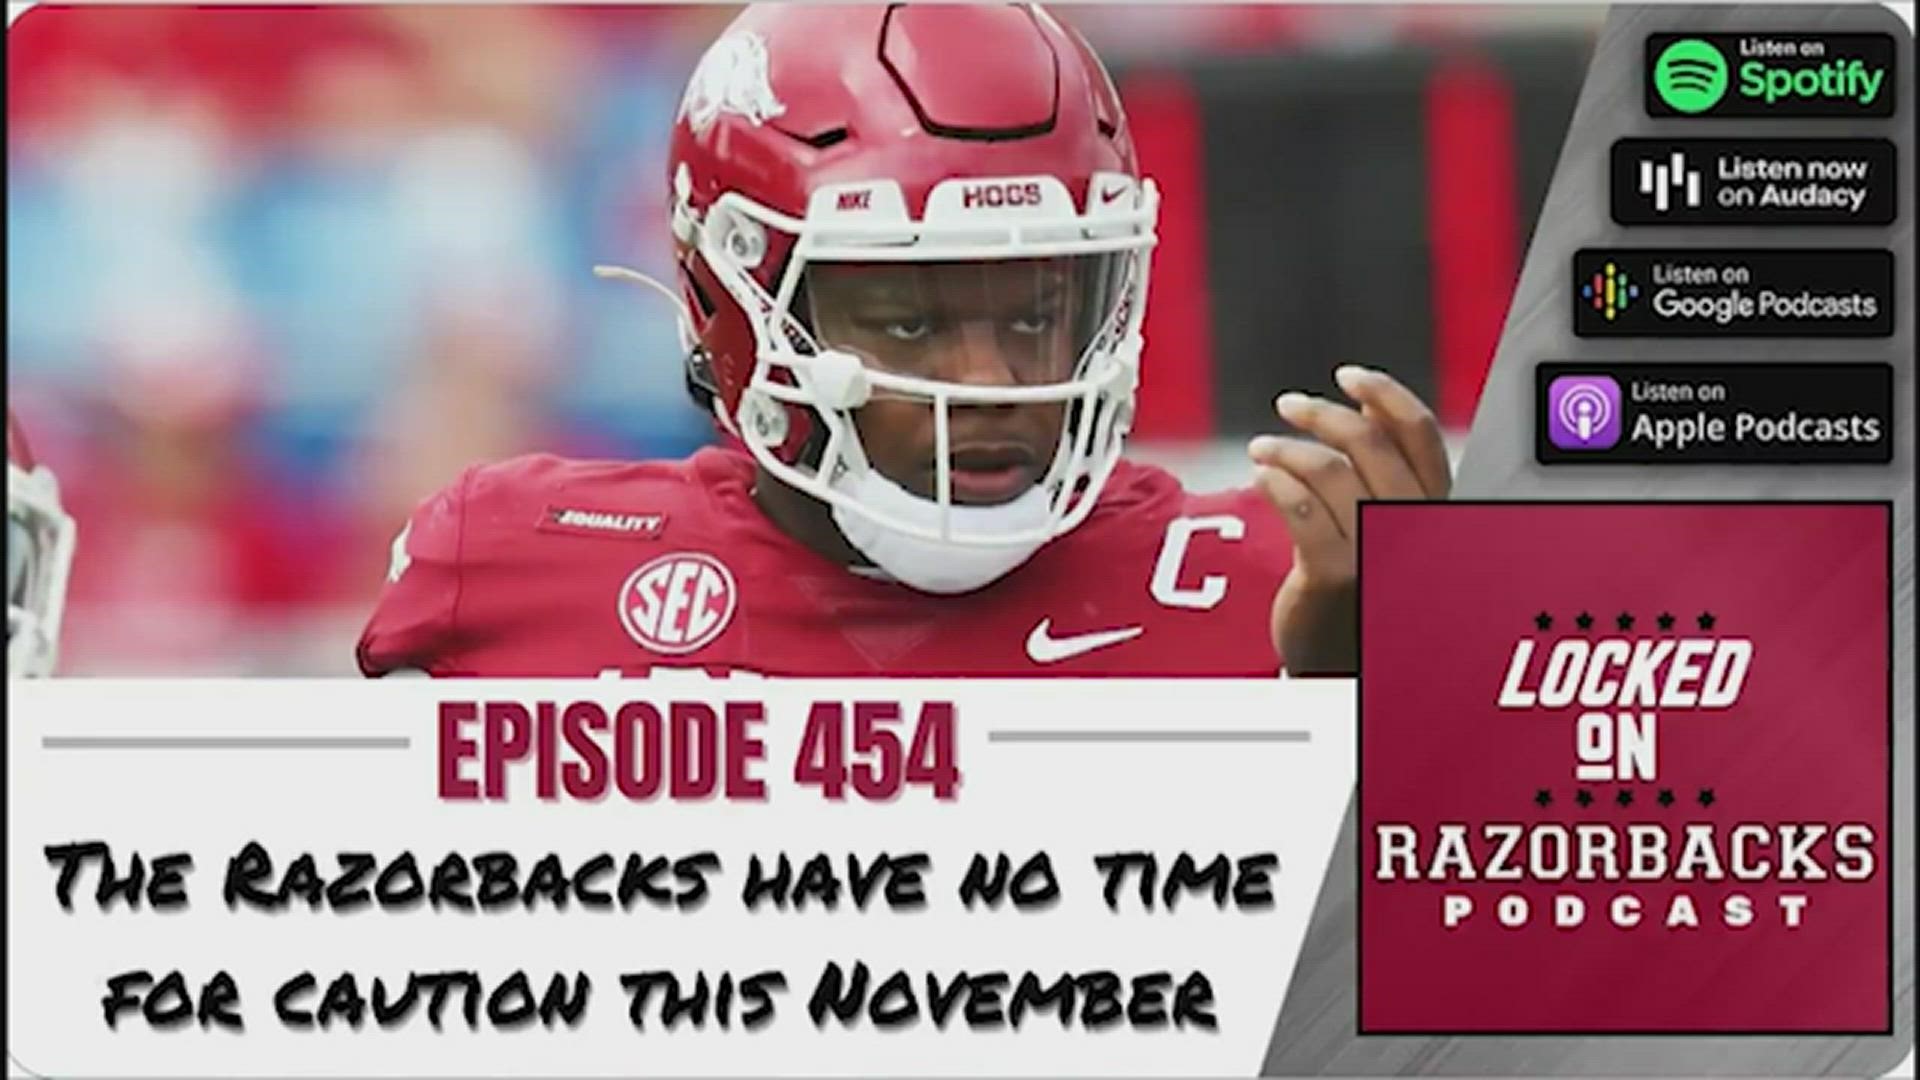 The Razorbacks have no time for caution this November and why Arkansas can be more than just a cute & fun story. All that and more on episode 454.